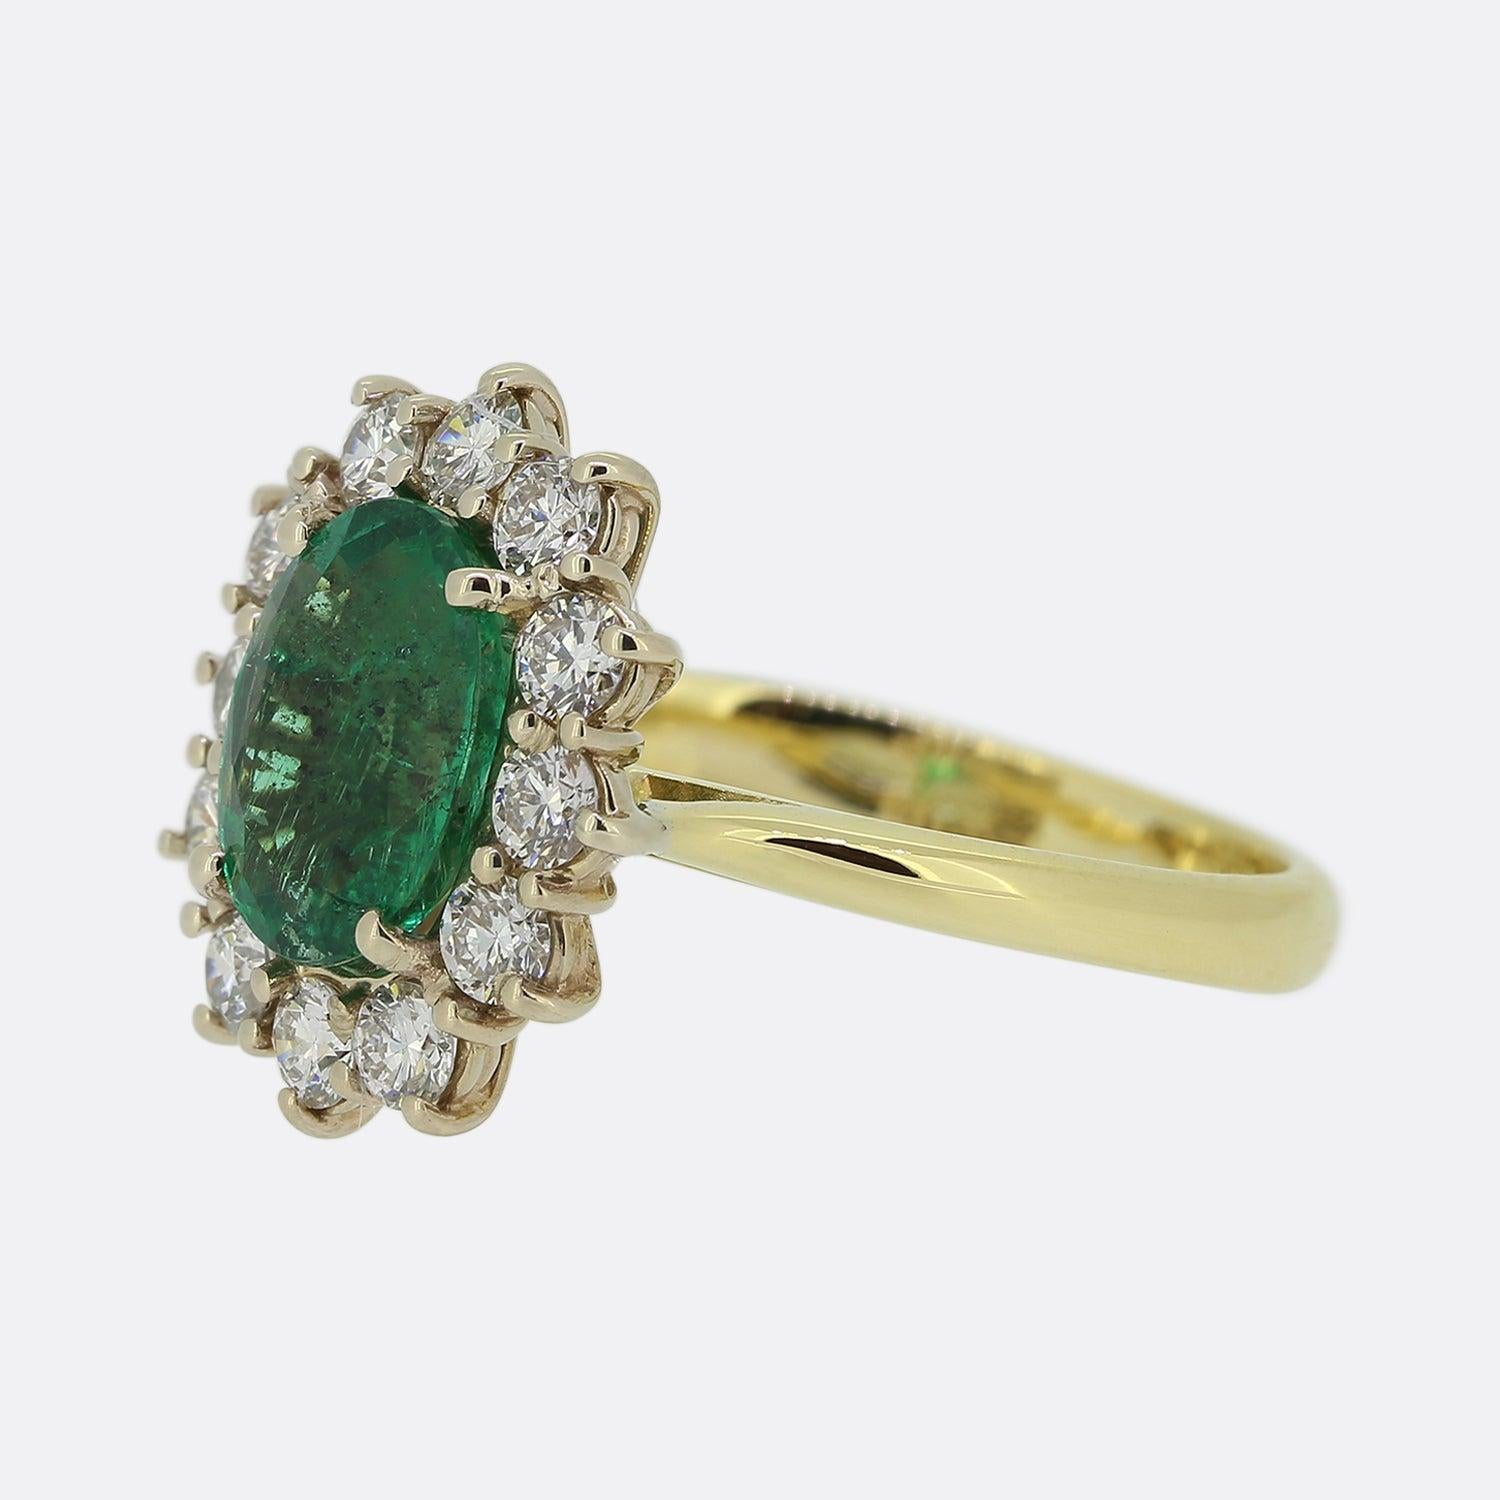 Here we have a wonderful emerald and diamond cluster ring. Crafted from 18ct yellow gold, this ring features a centralised oval shaped emerald which possesses a intense vivid green colour tone. This focal stone is highly complimented by a cluster of